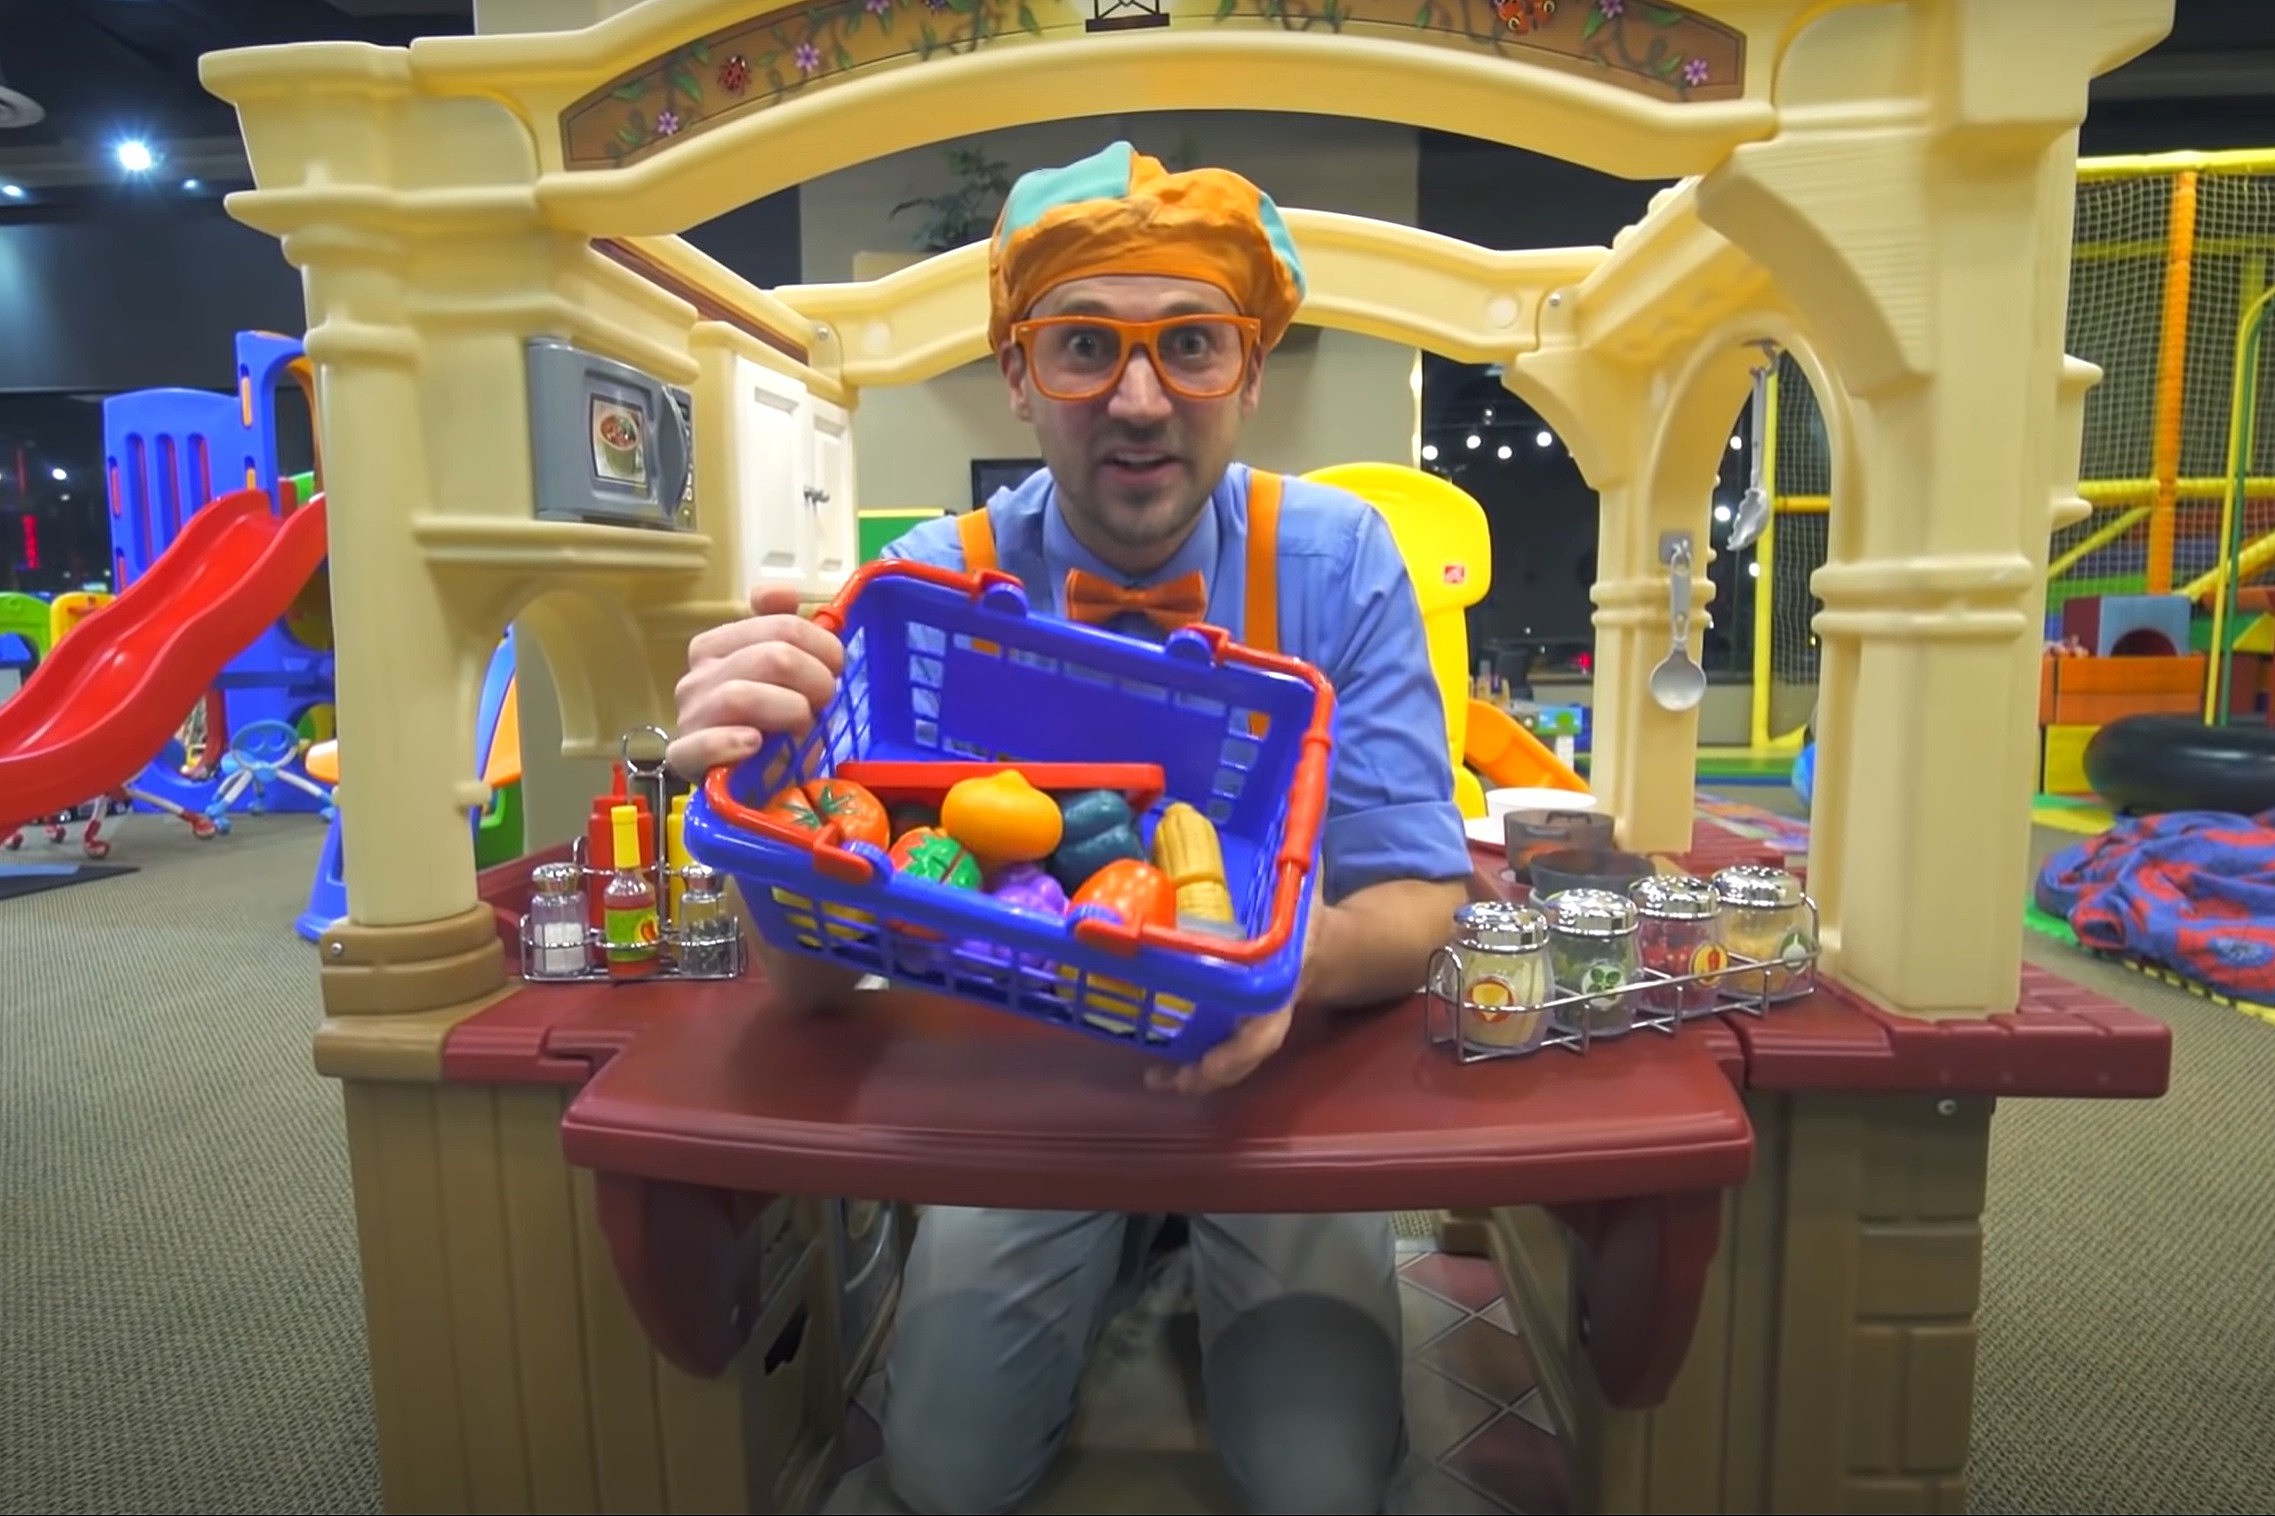 Get Ready Parents, Blippi is Coming to Portland and Bangor, Maine